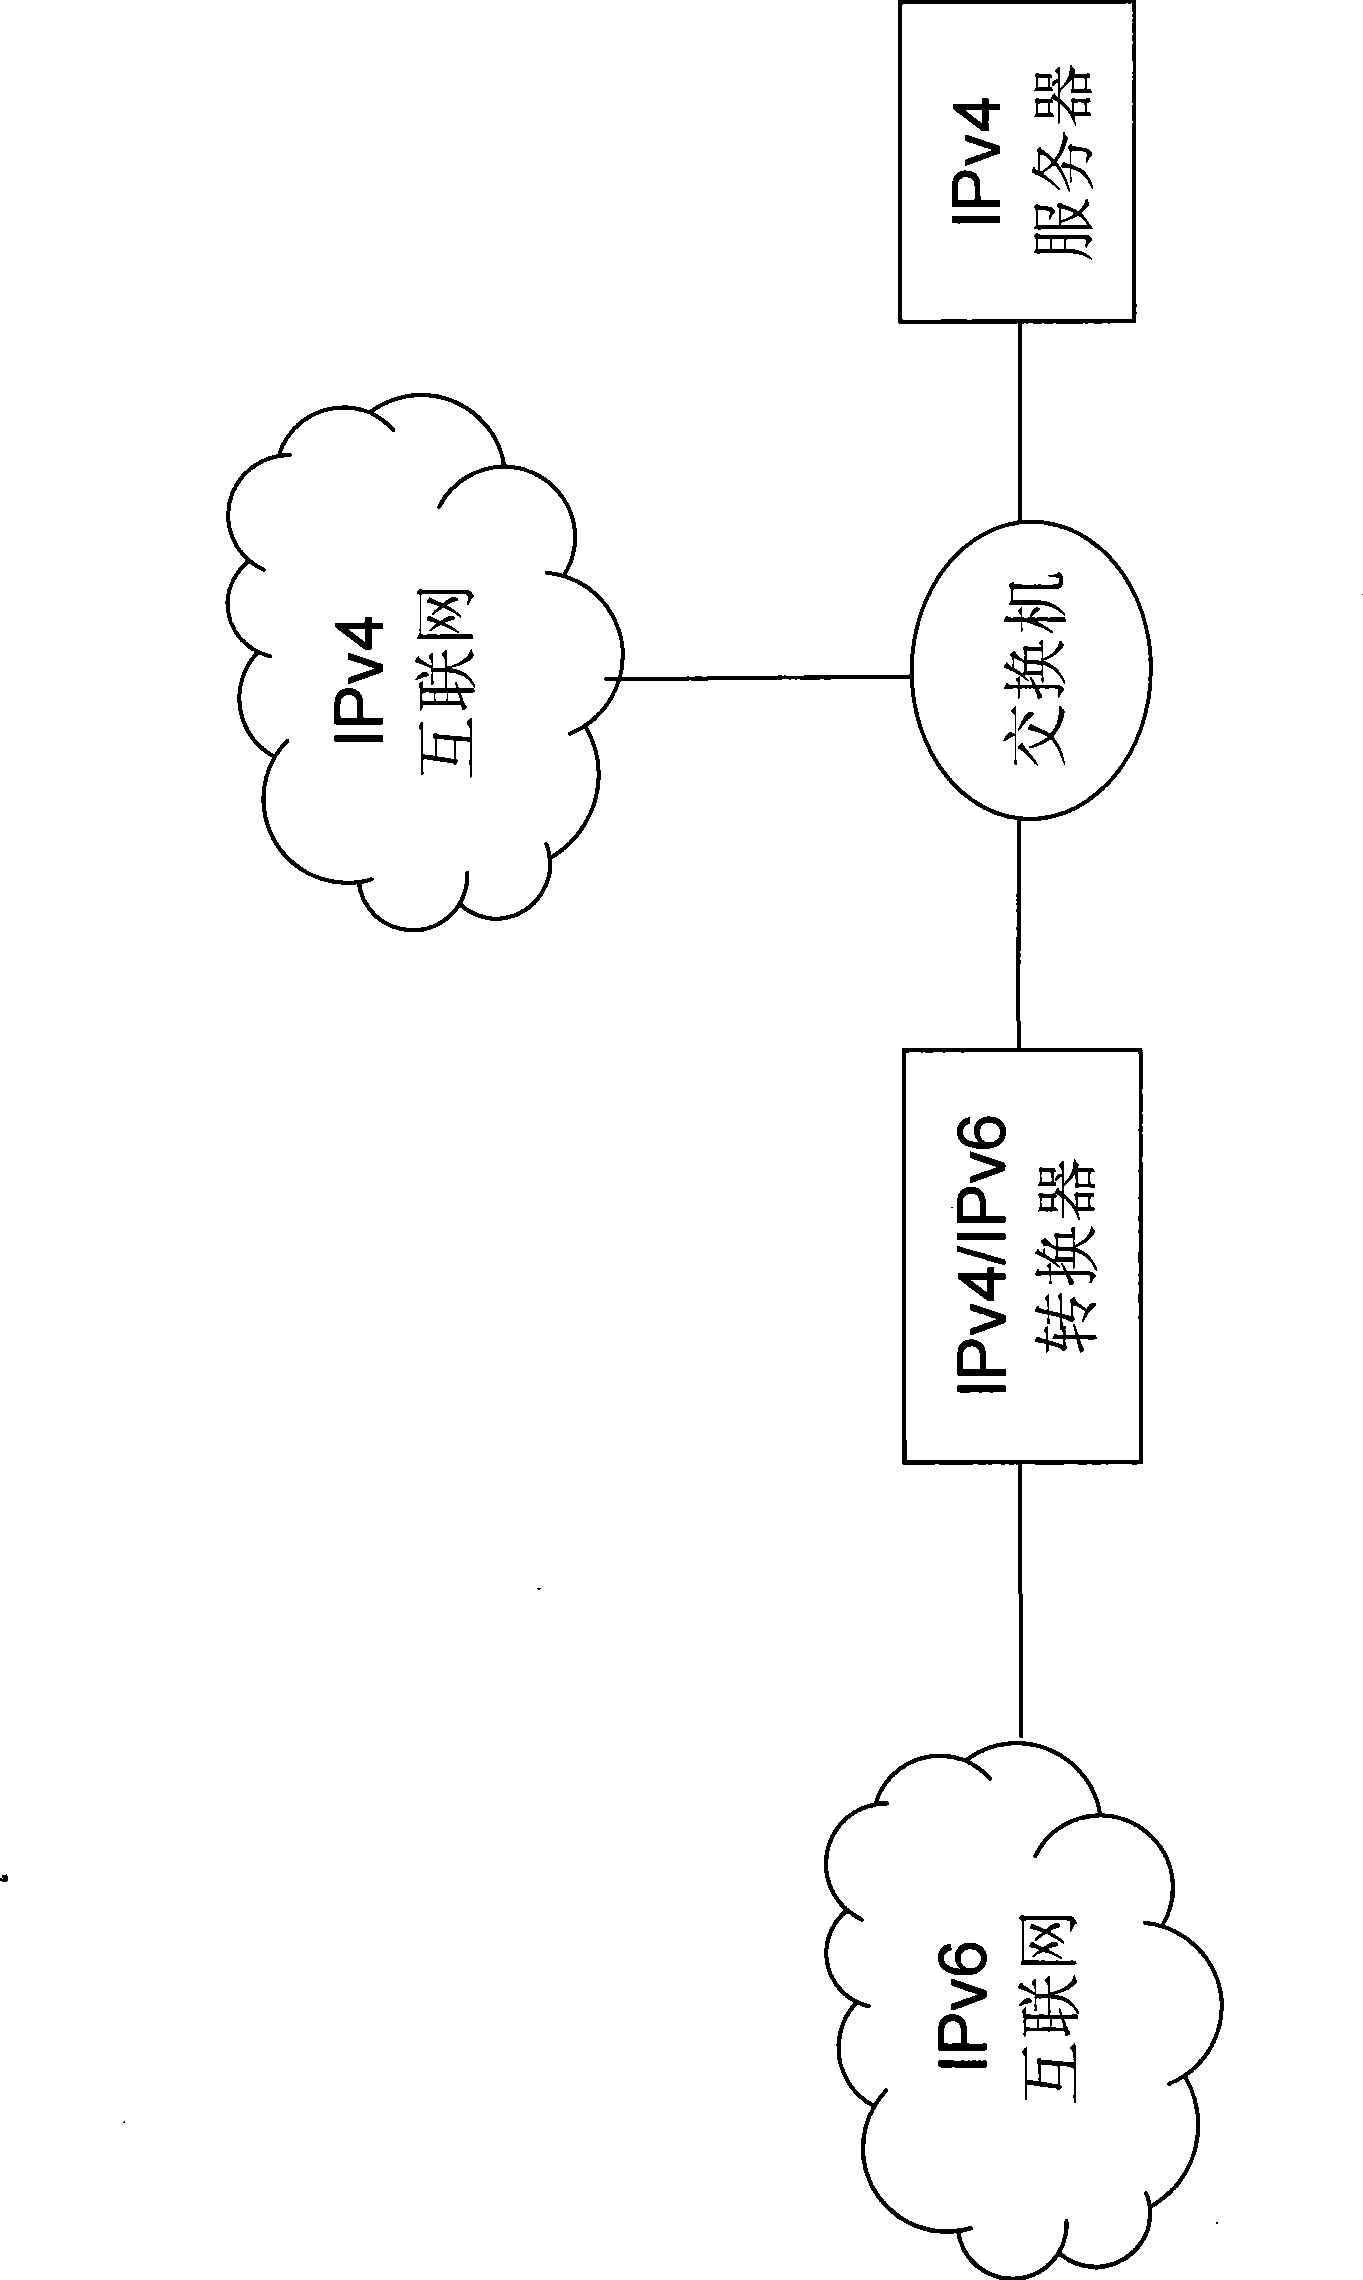 Method for IPv4 server access by IPv6 server based on quasi-static mapping